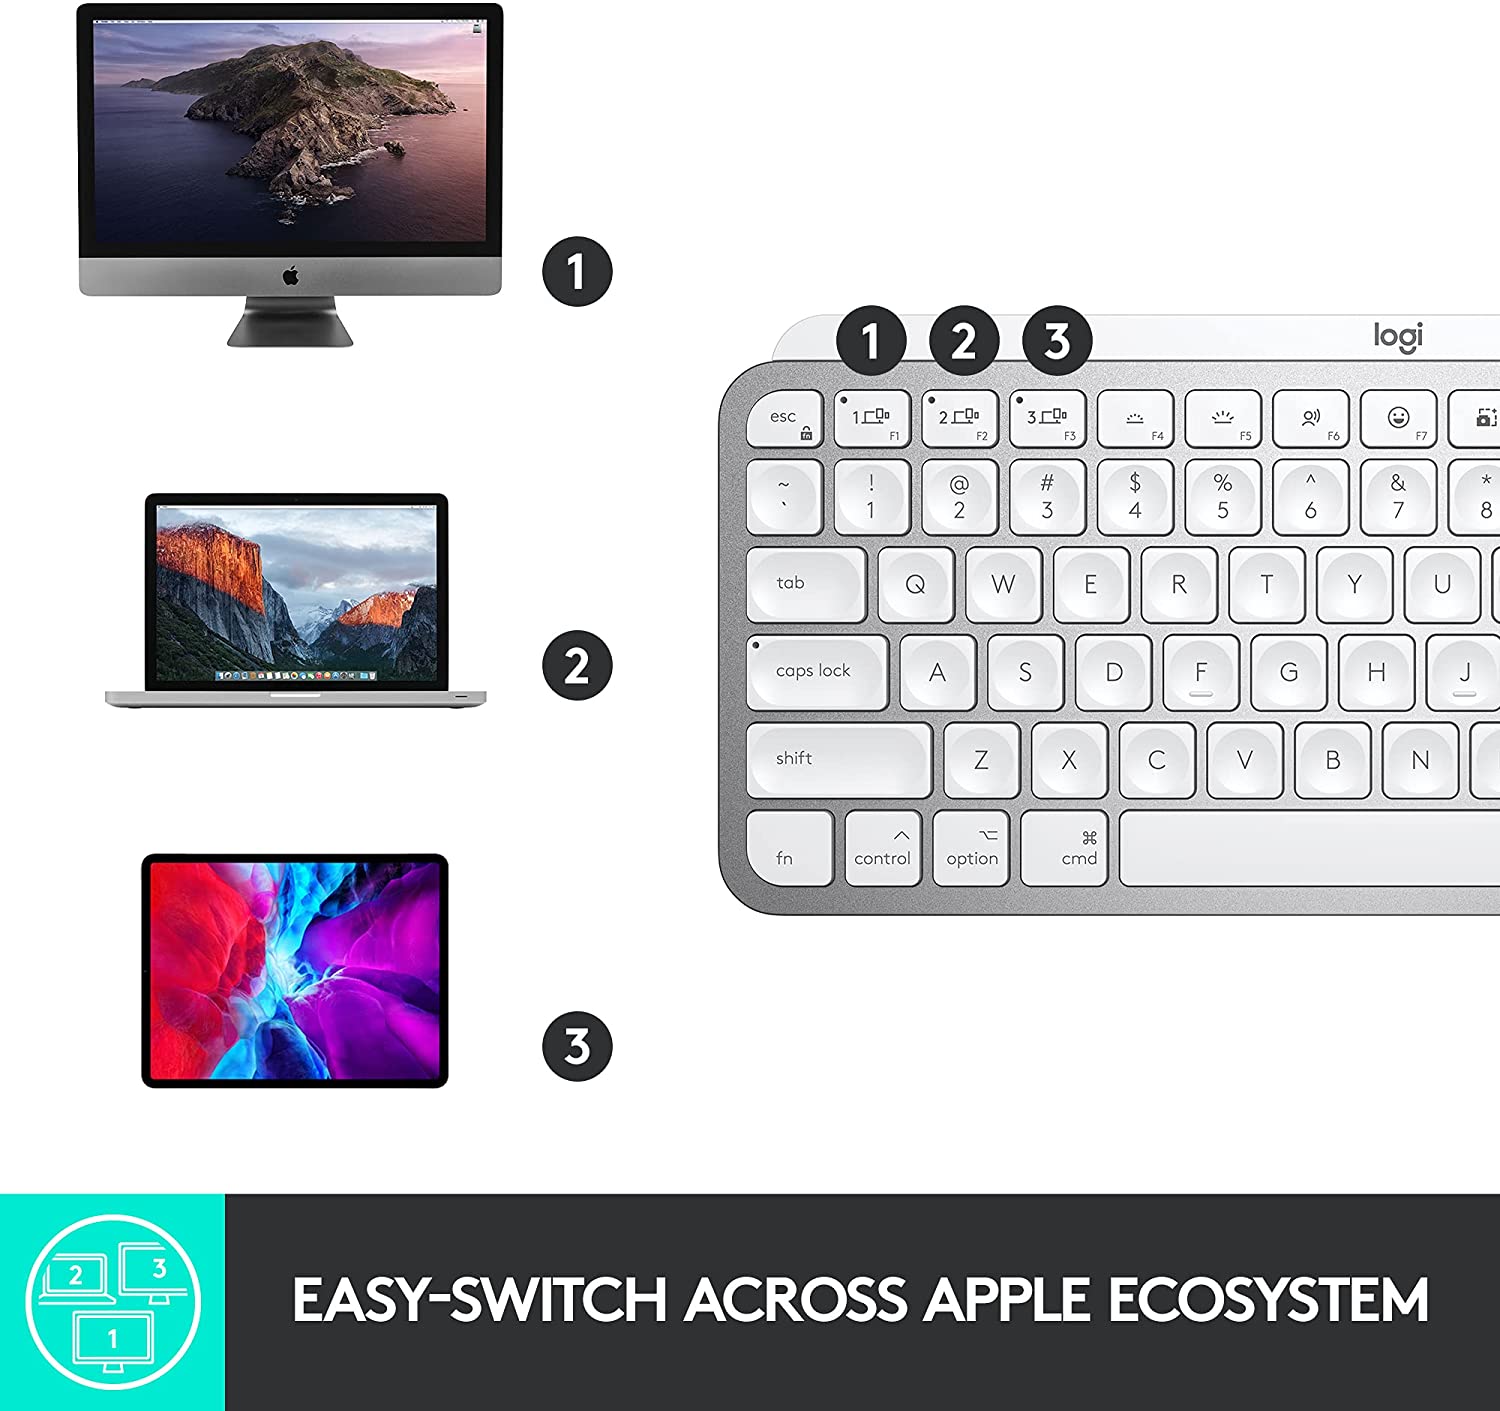 sync wireless apple keypad to computer without usb